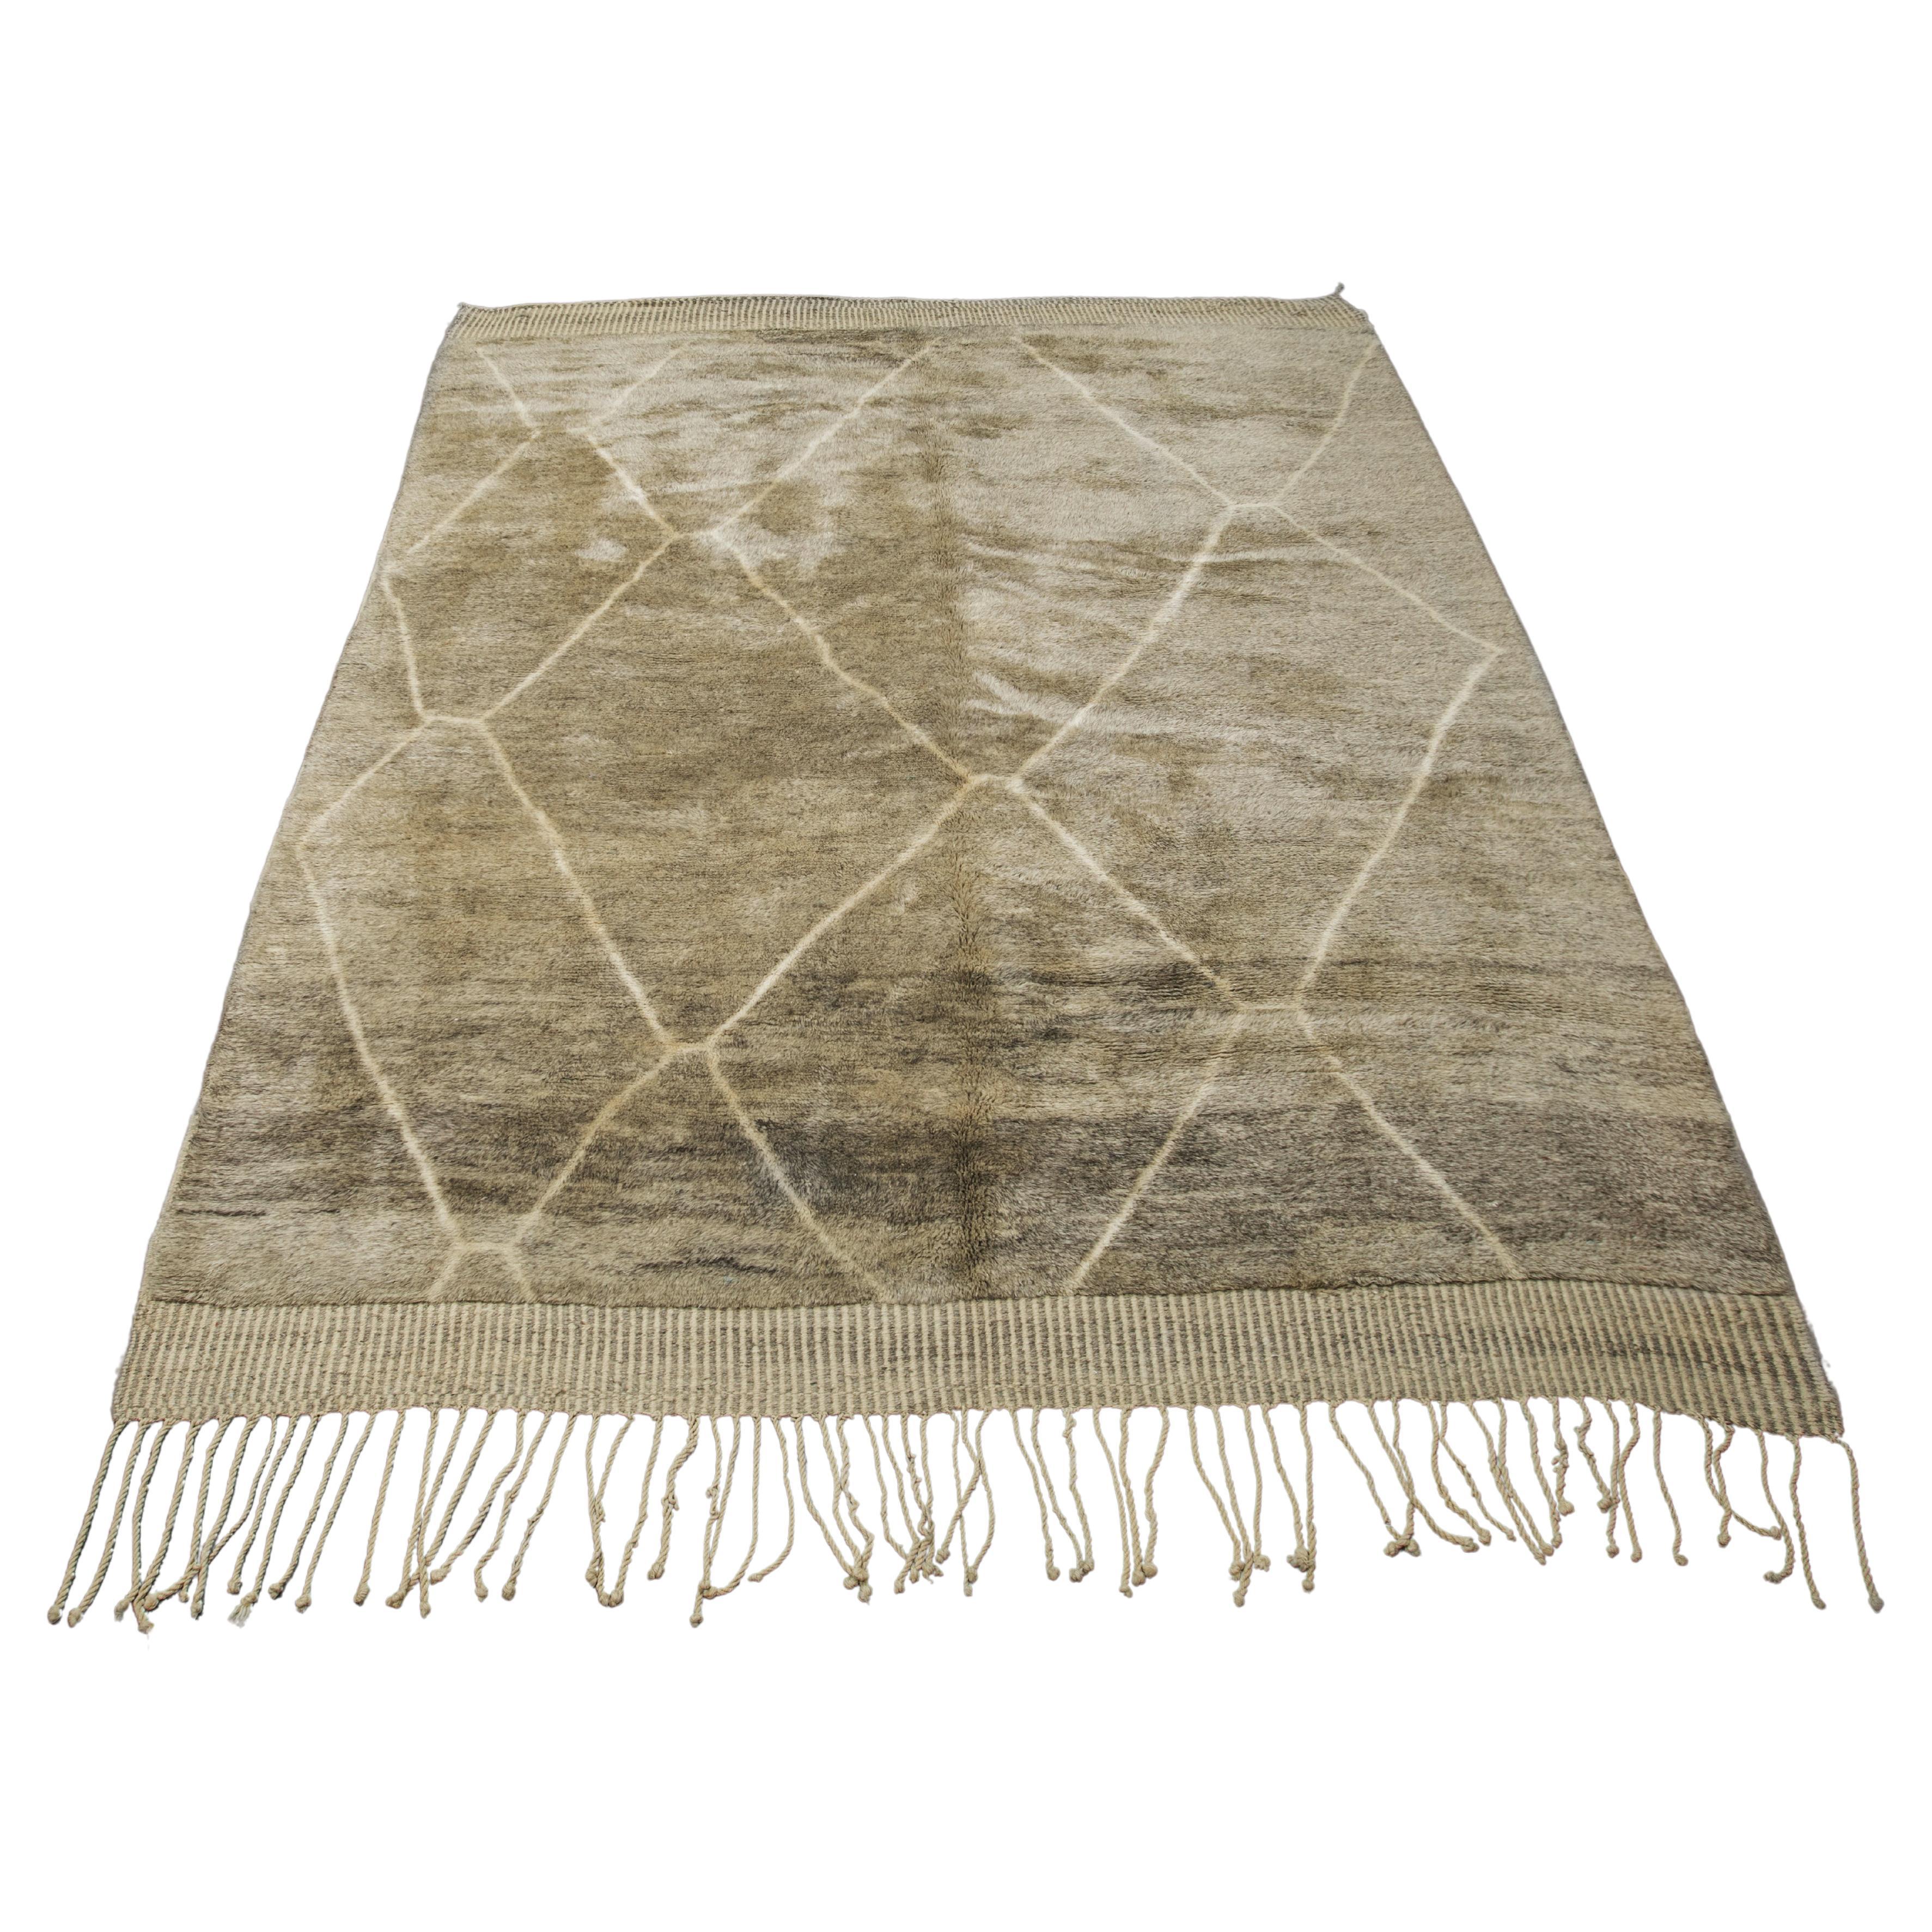 Neutral and Beige  Moroccan Rug 10'2"x 8'2"